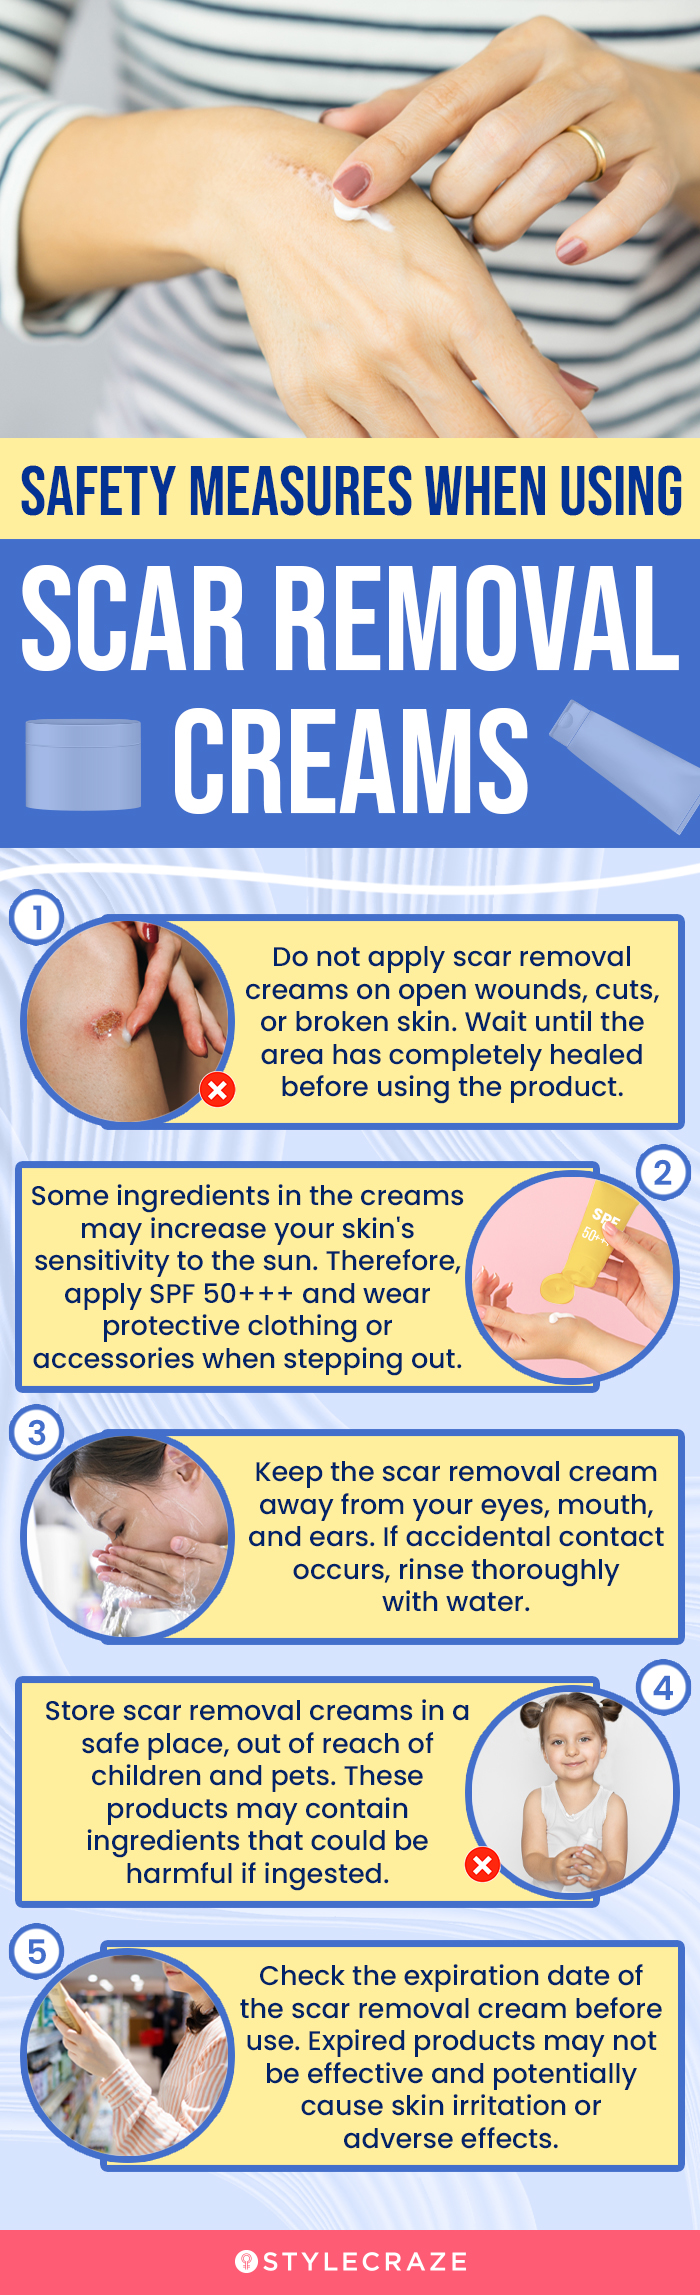 Safety Measures When Using Scar Removal Creams (infographic)